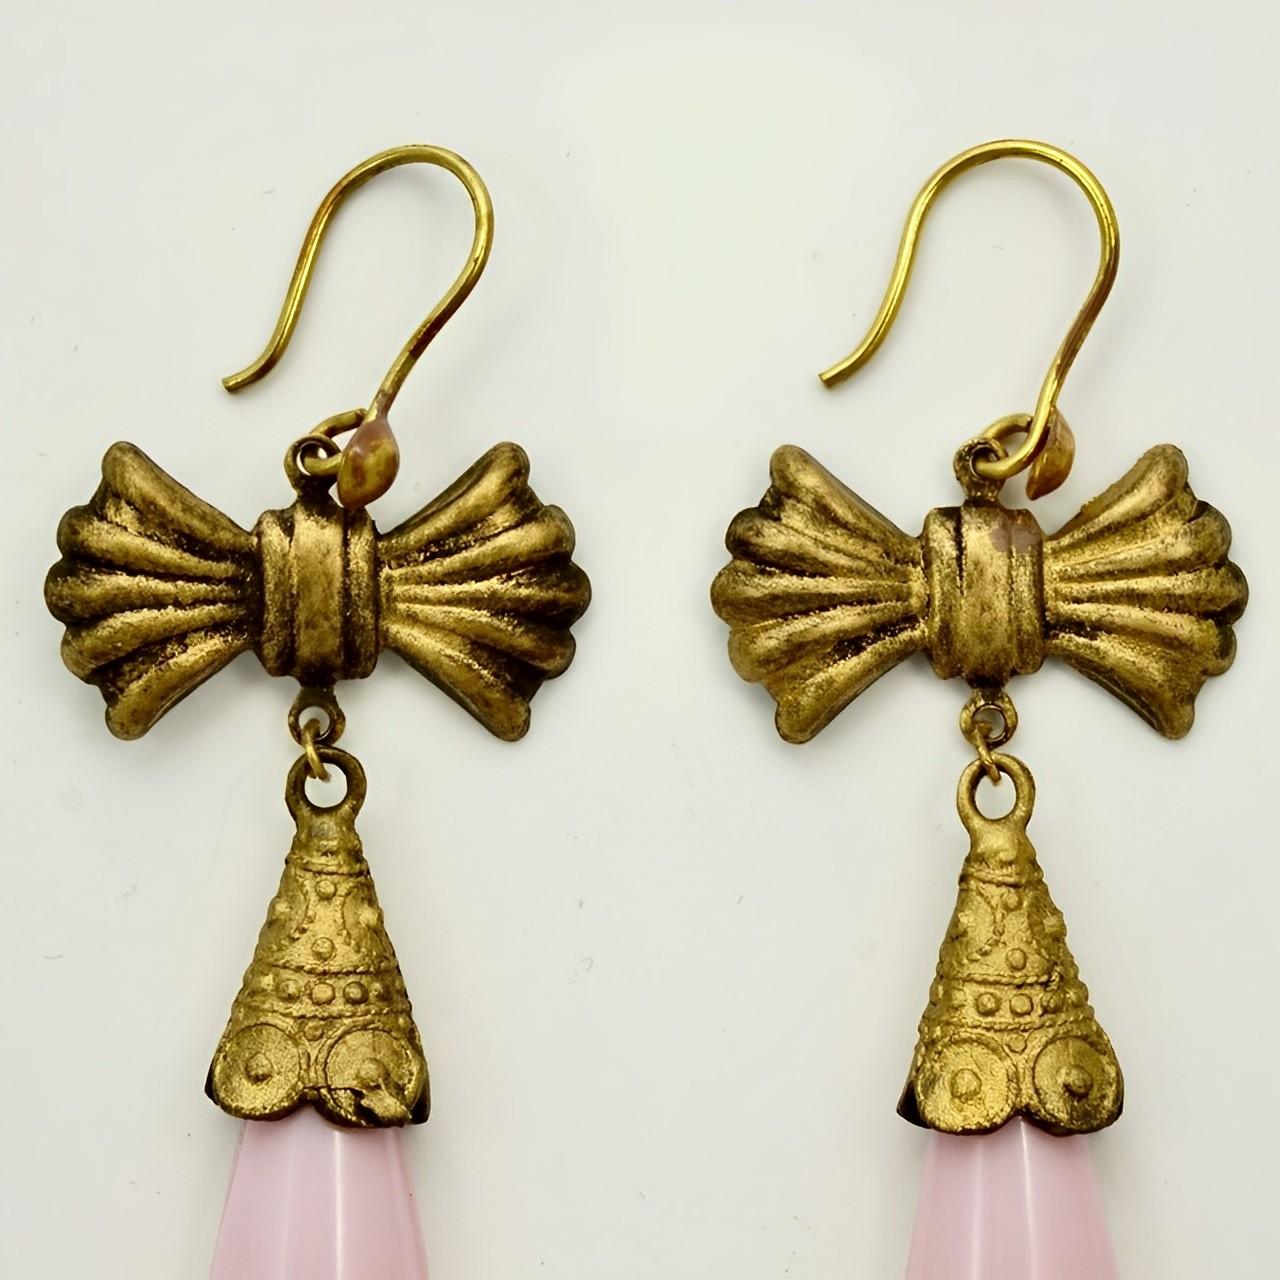 Fabulous Czech ornate gilt metal drop earrings. Featuring lovely pink and gold long glass drops with a floral design, and a bow top. Measuring length 7.6 cm / 3 inches not including the hooks. The earrings are in very good condition. There is some